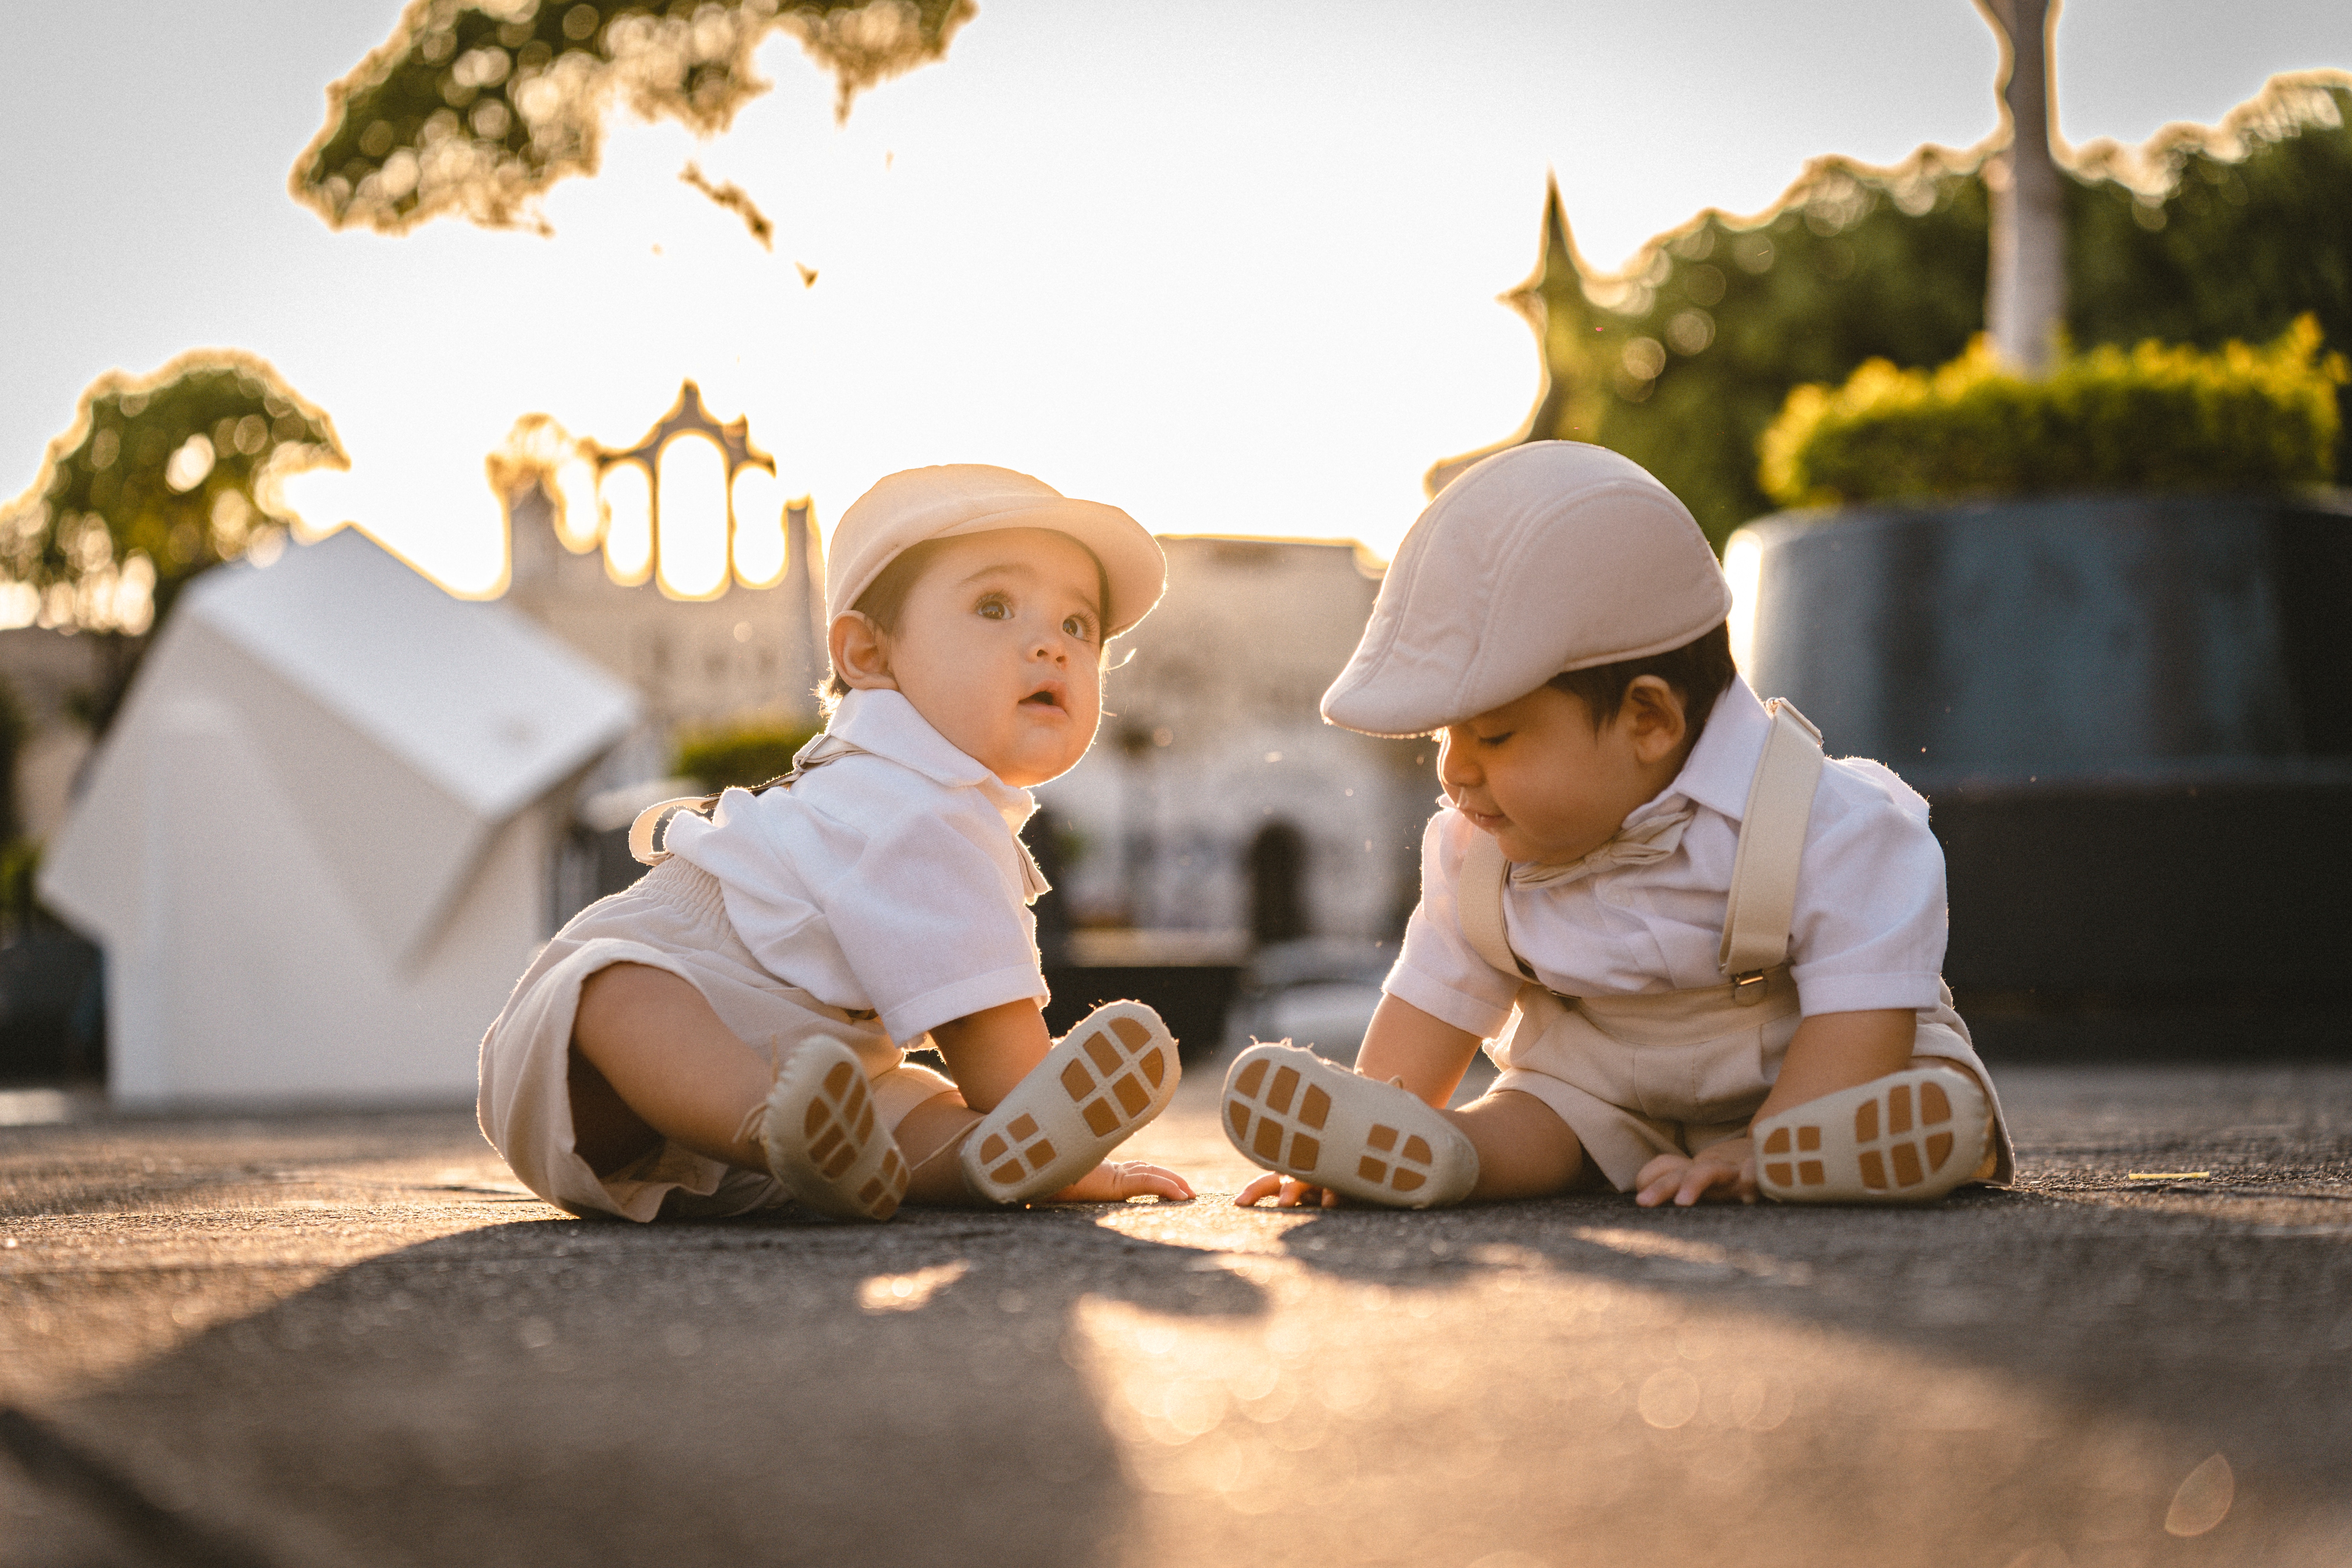 A pair of twins dressed identically and sitting on the ground | Source: Pexels